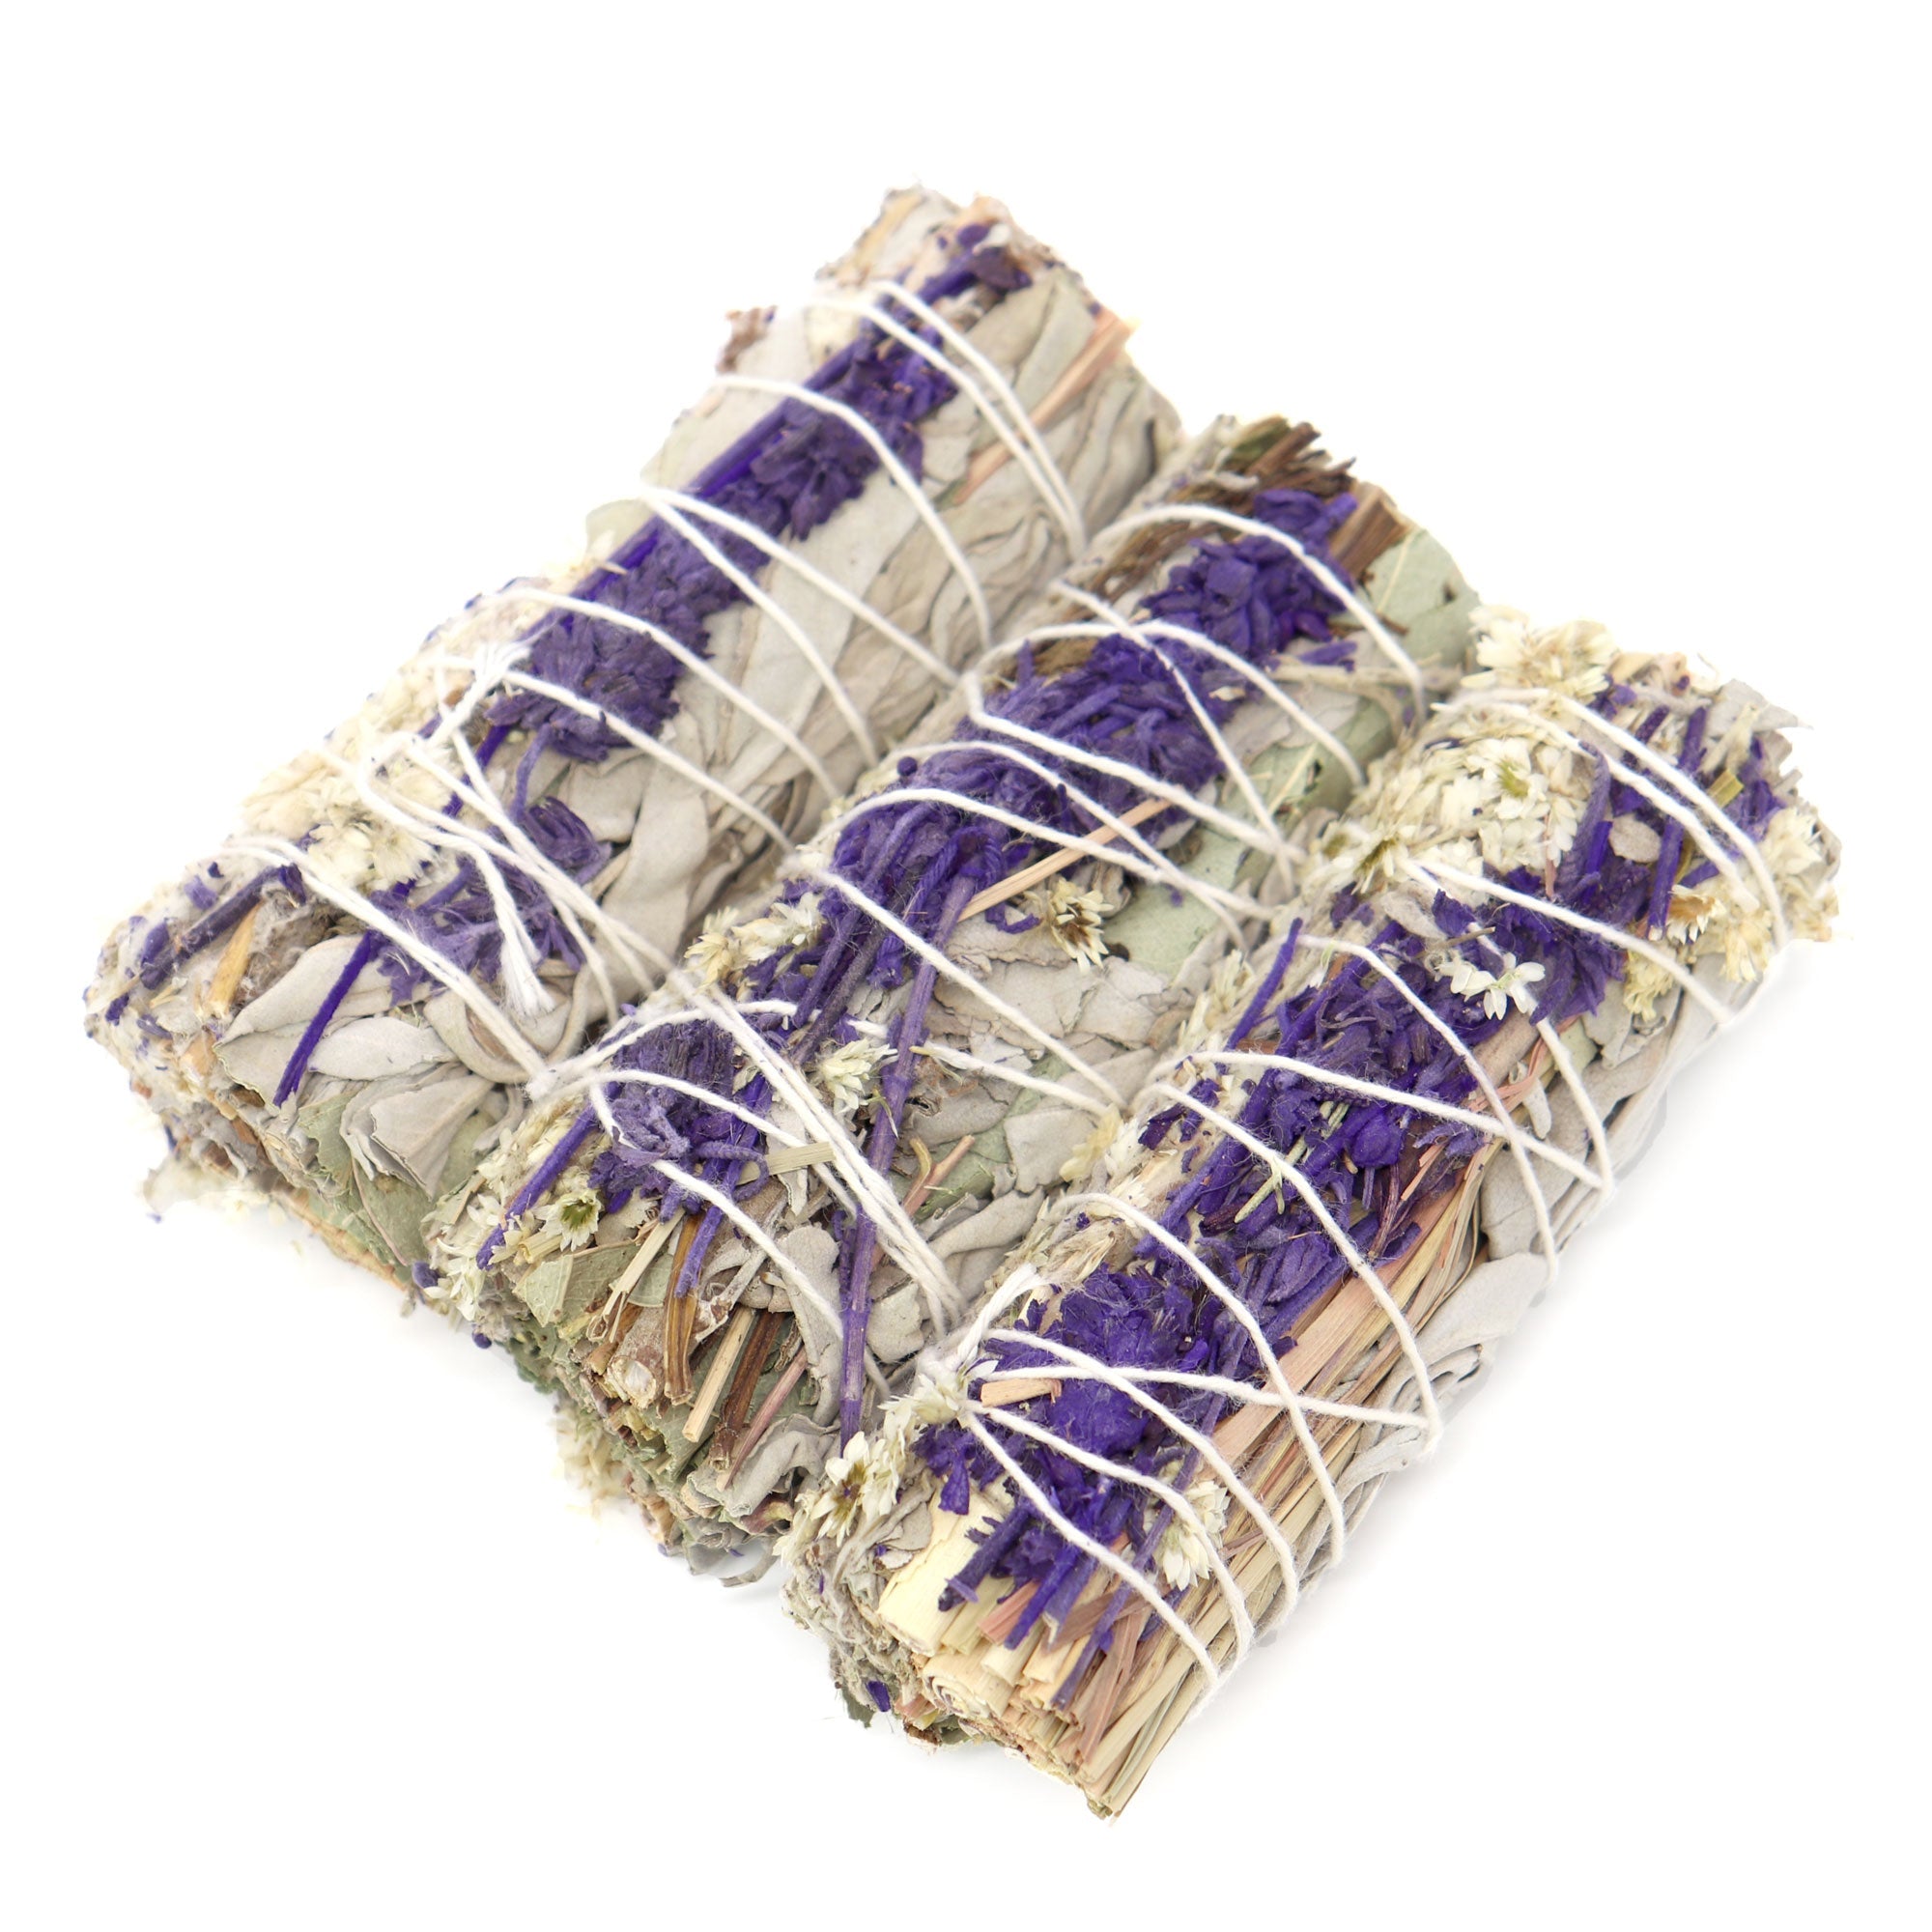 White Sage & 7 Sacred Herbs Smudge Stick - 13 Moons